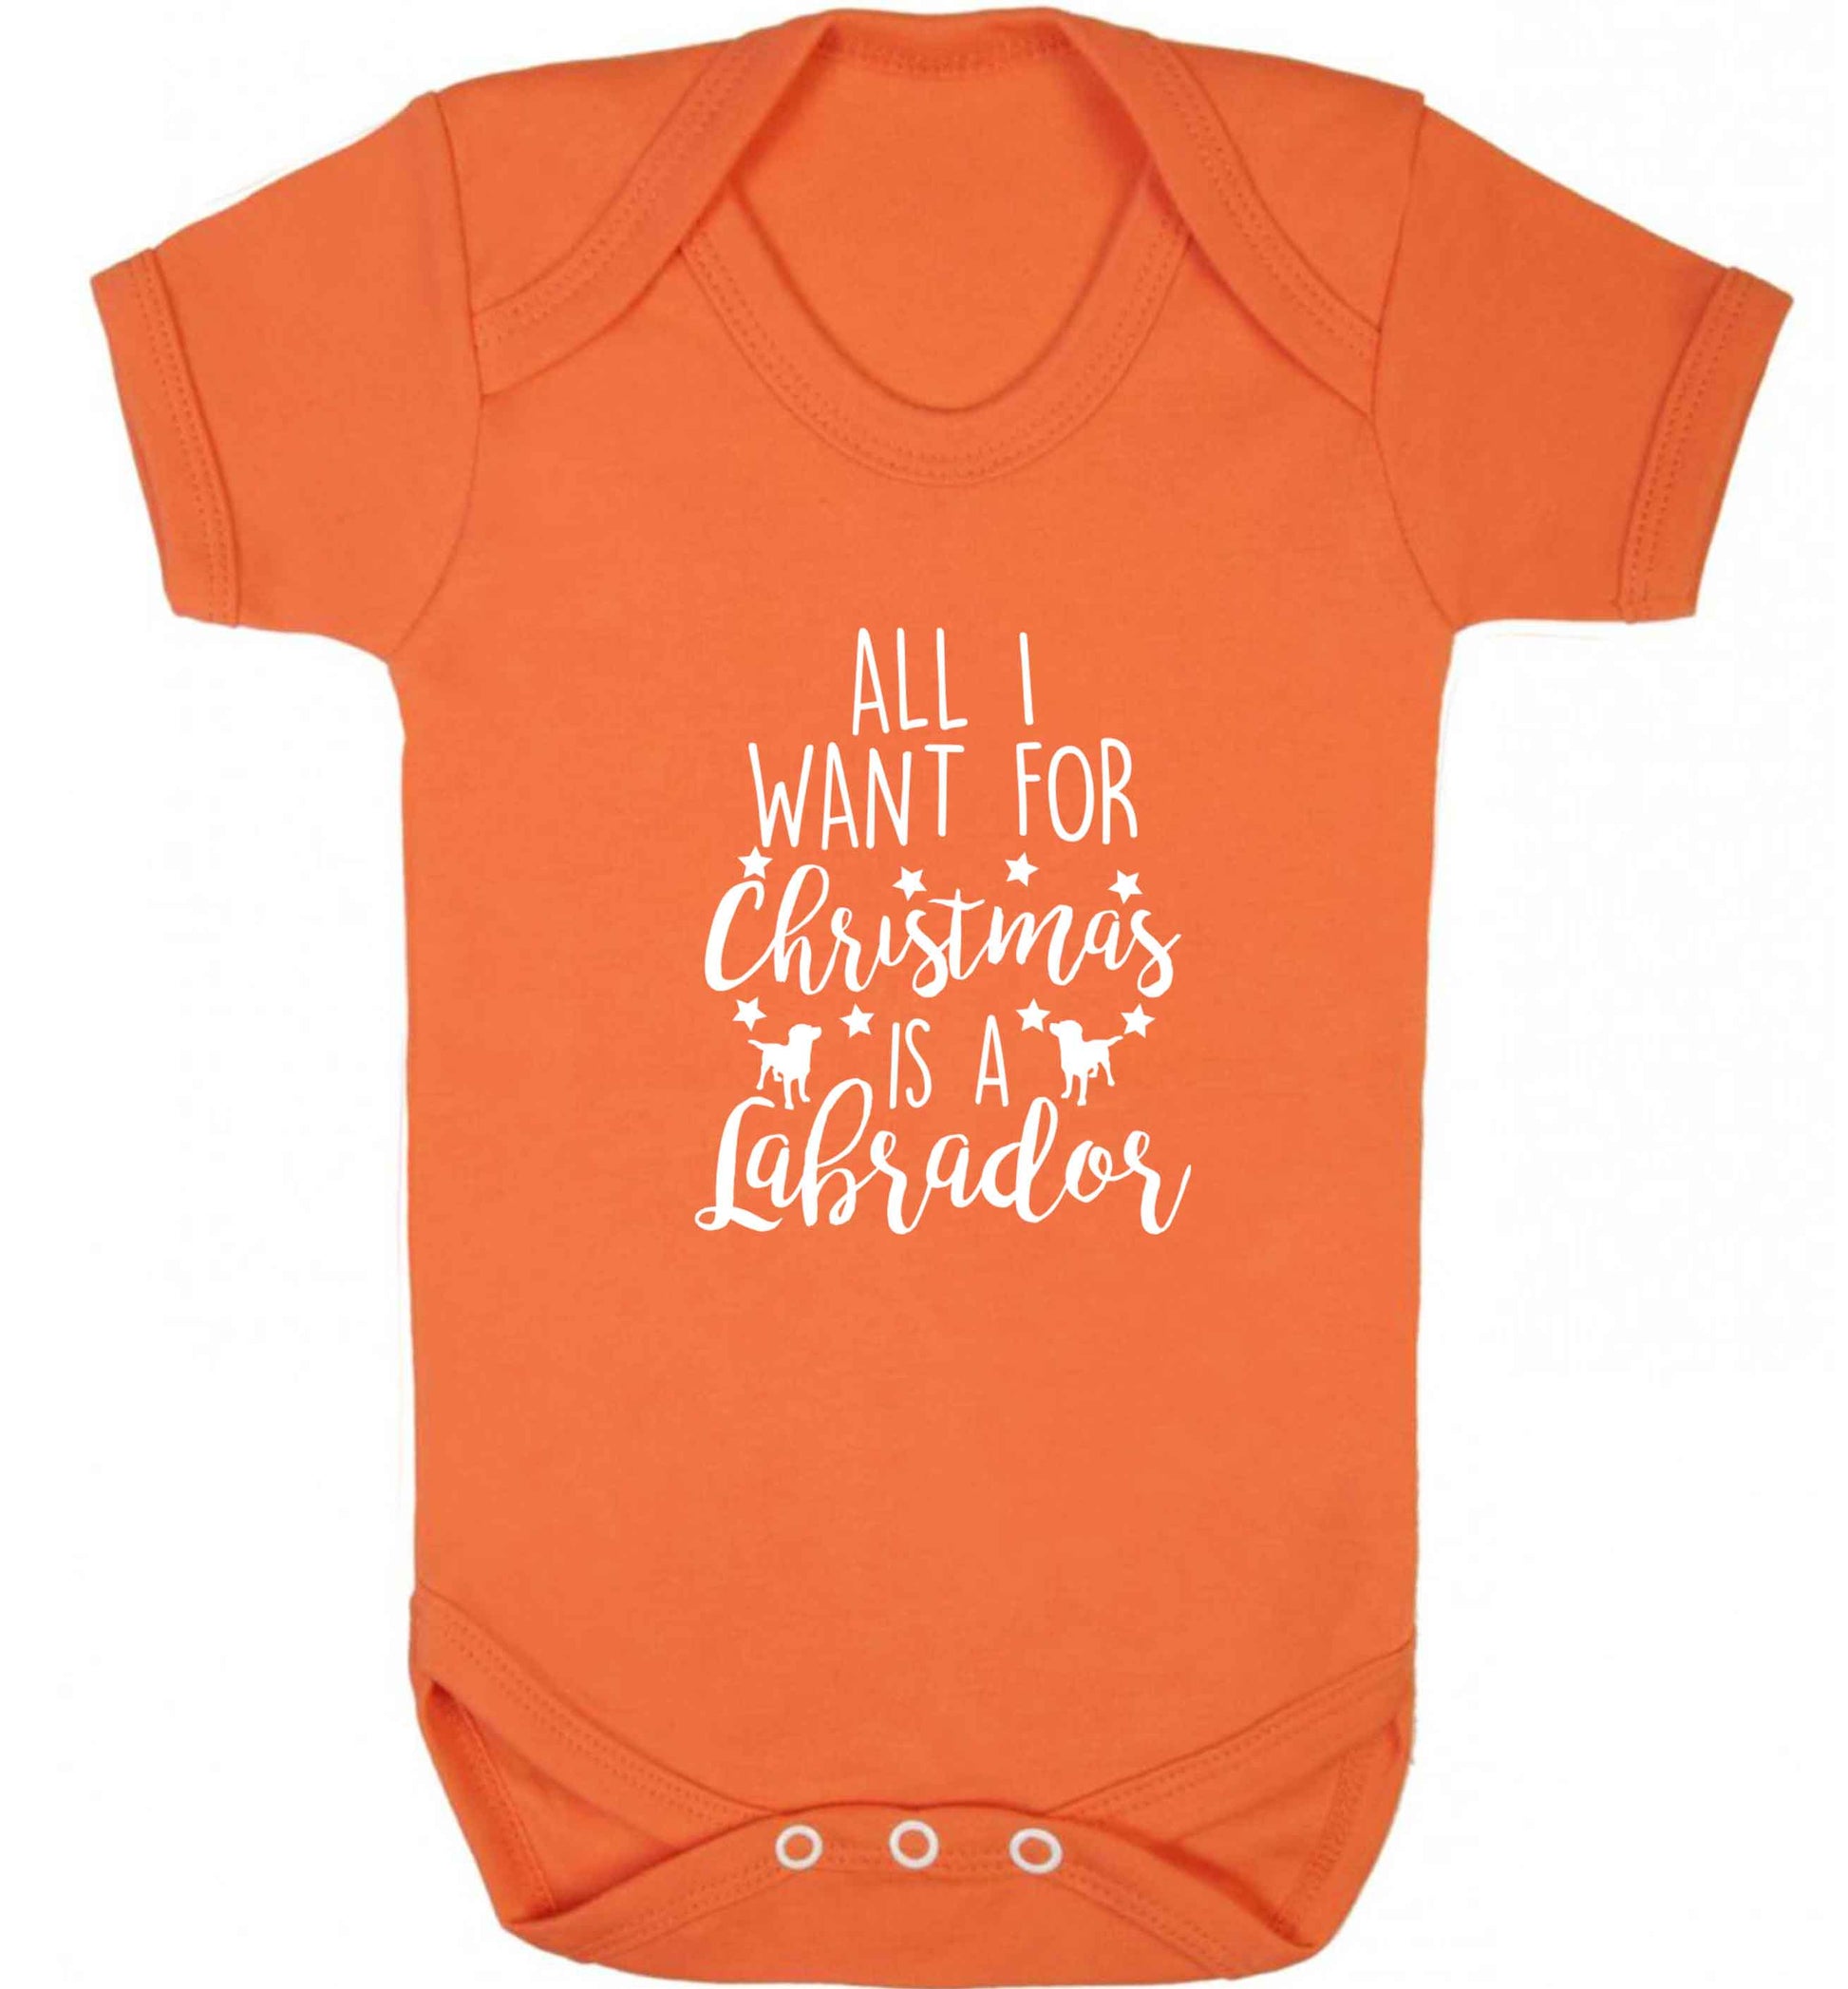 All I want for Christmas is a labrador baby vest orange 18-24 months